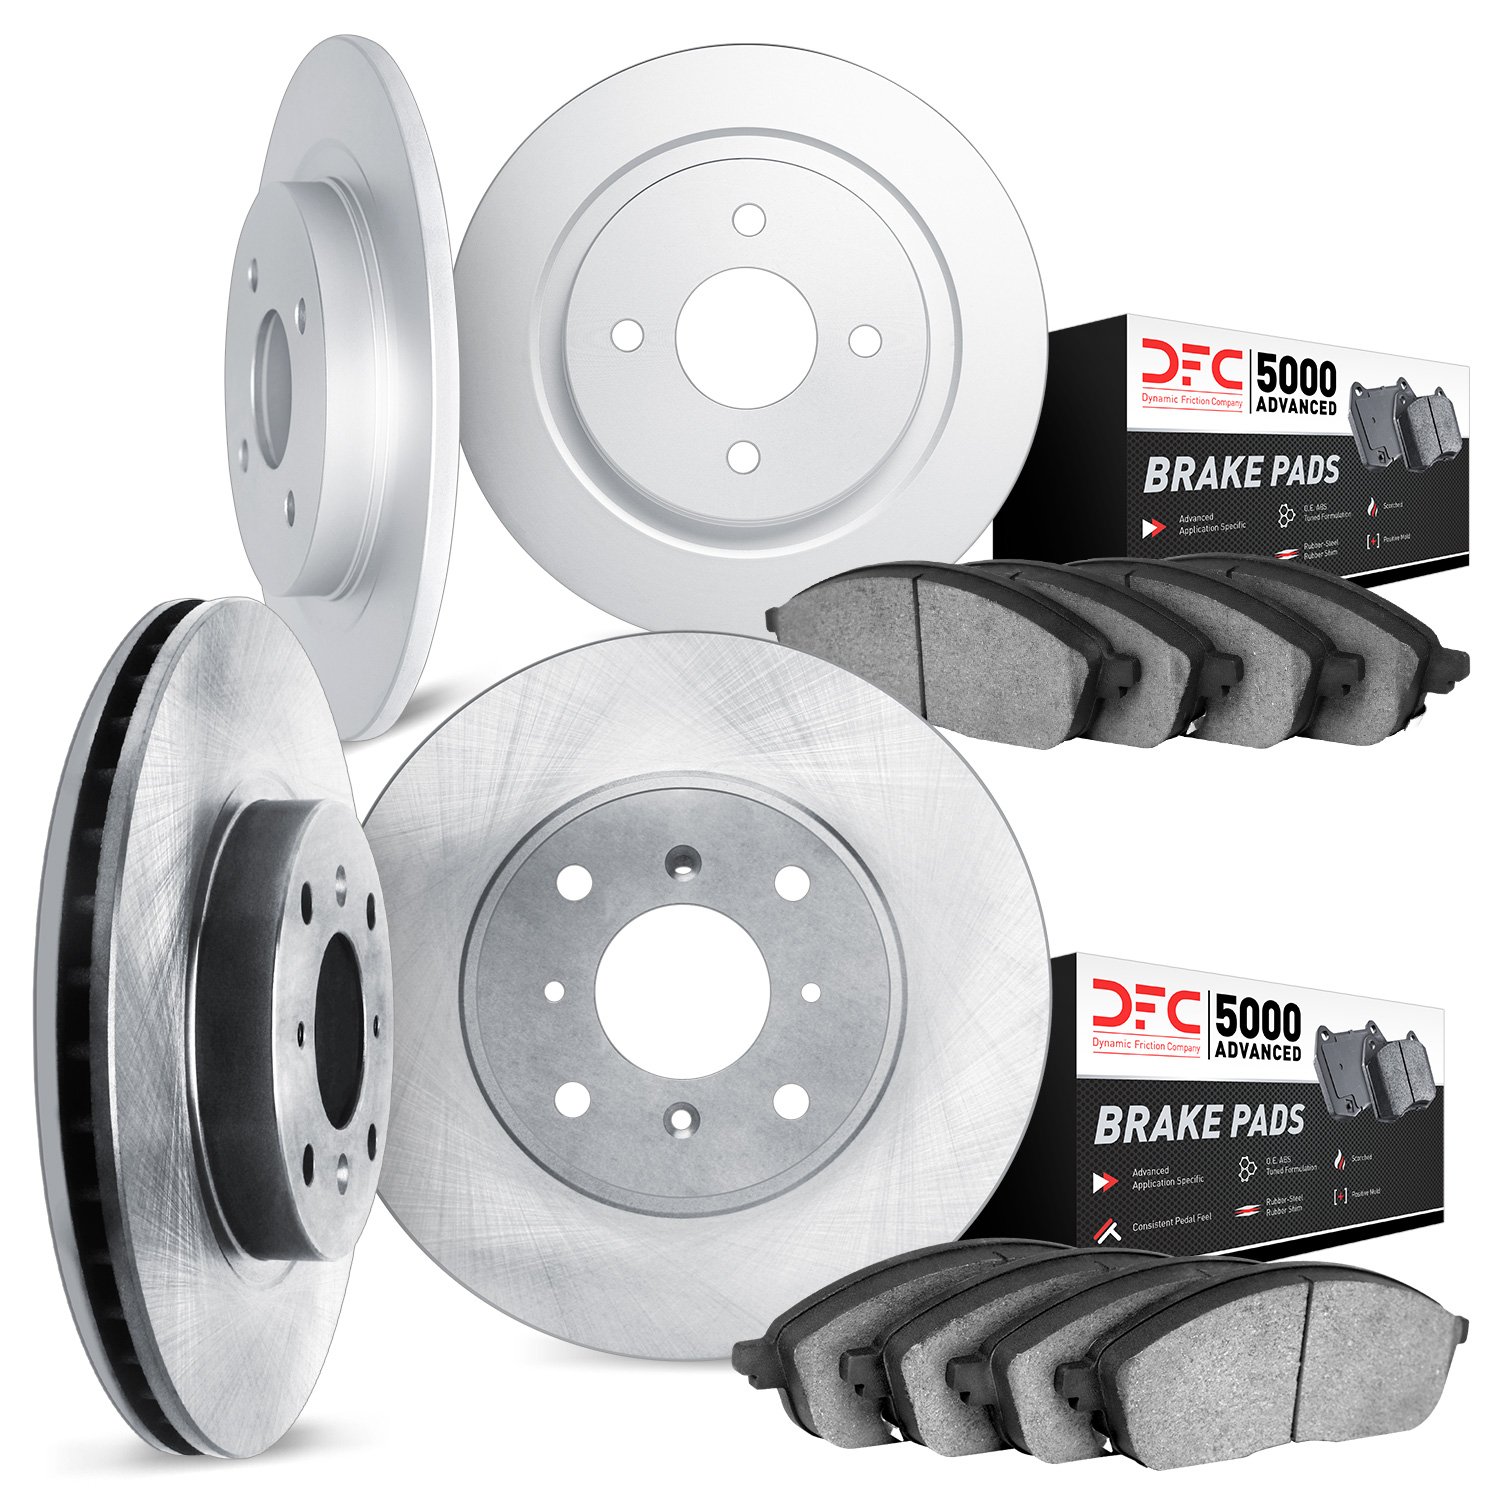 6504-28003 Brake Rotors w/5000 Advanced Brake Pads Kit, 1977-1986 Peugeot, Position: Front and Rear